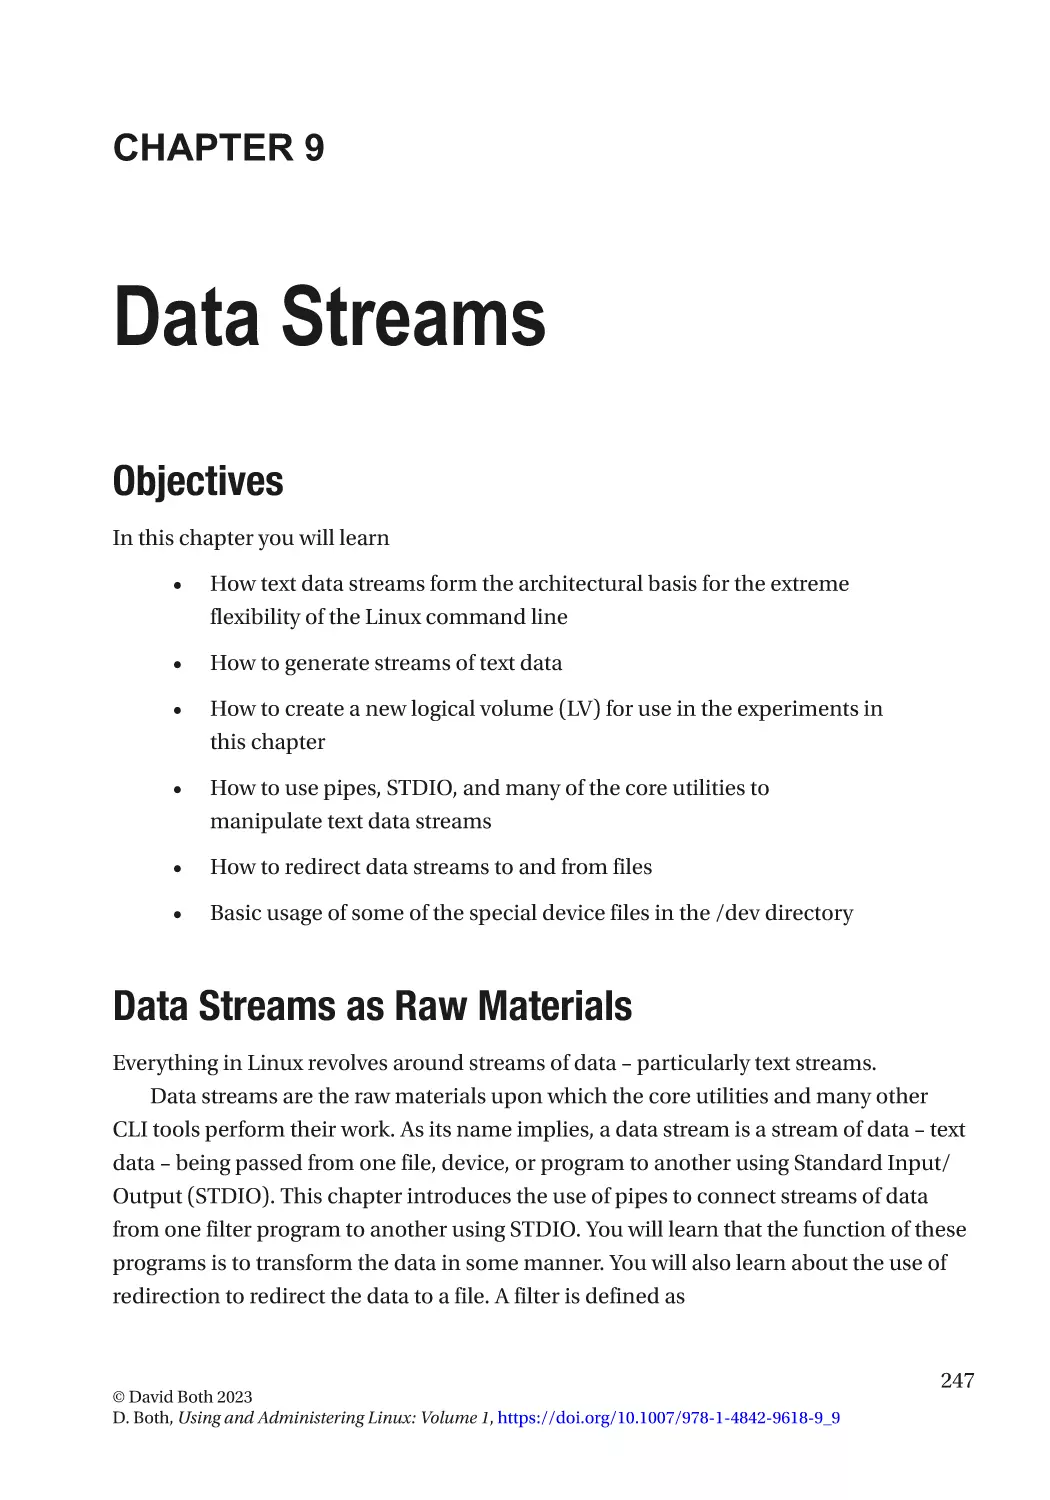 Chapter 9
Objectives
Data Streams as Raw Materials